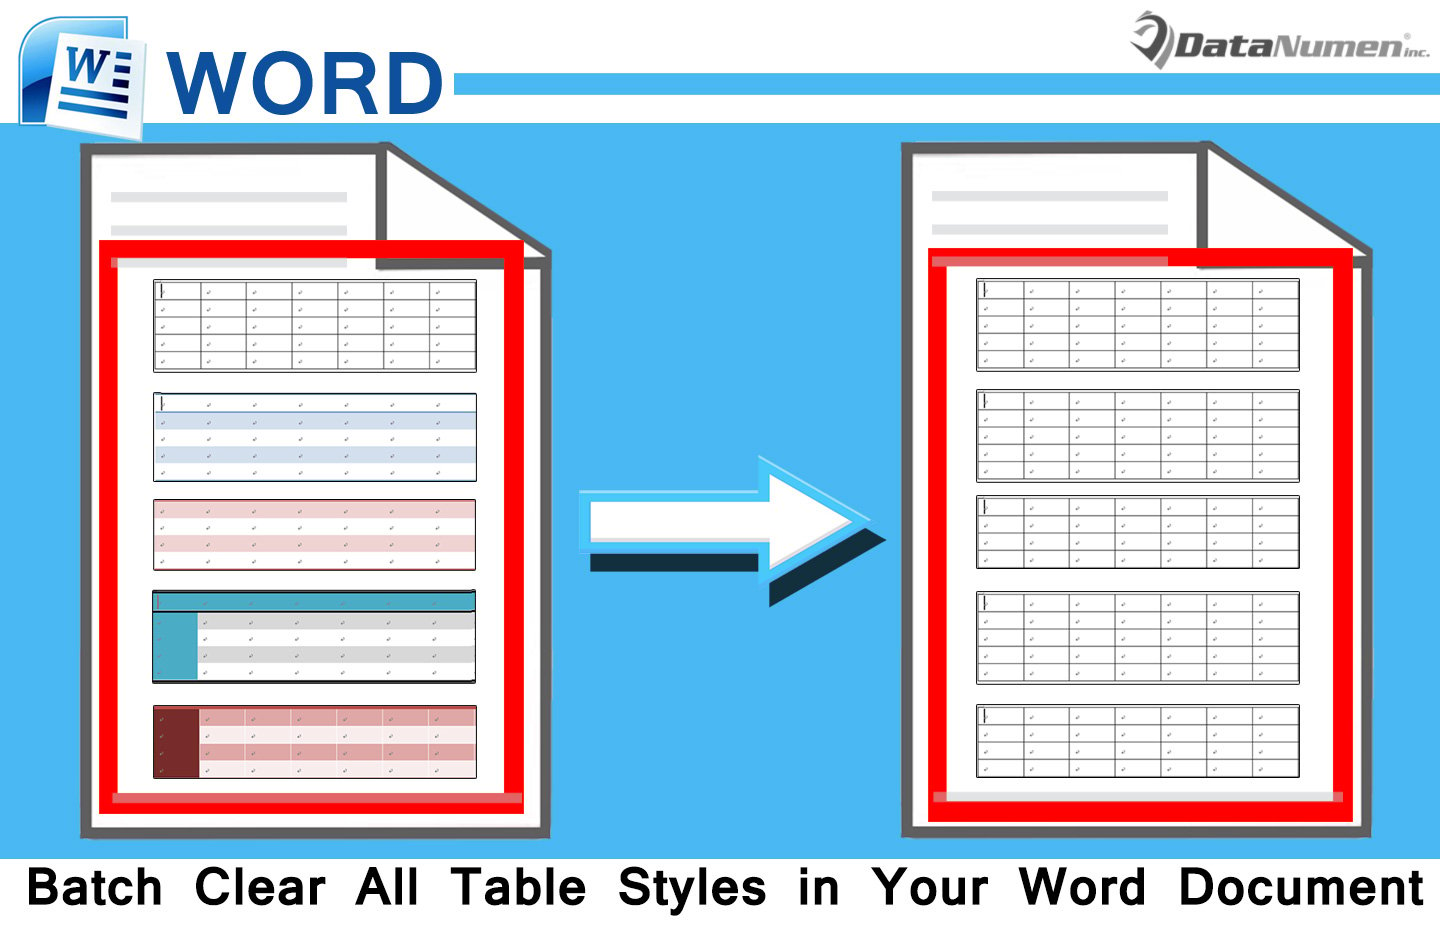 Batch Clear All Table Styles in Your Word Document